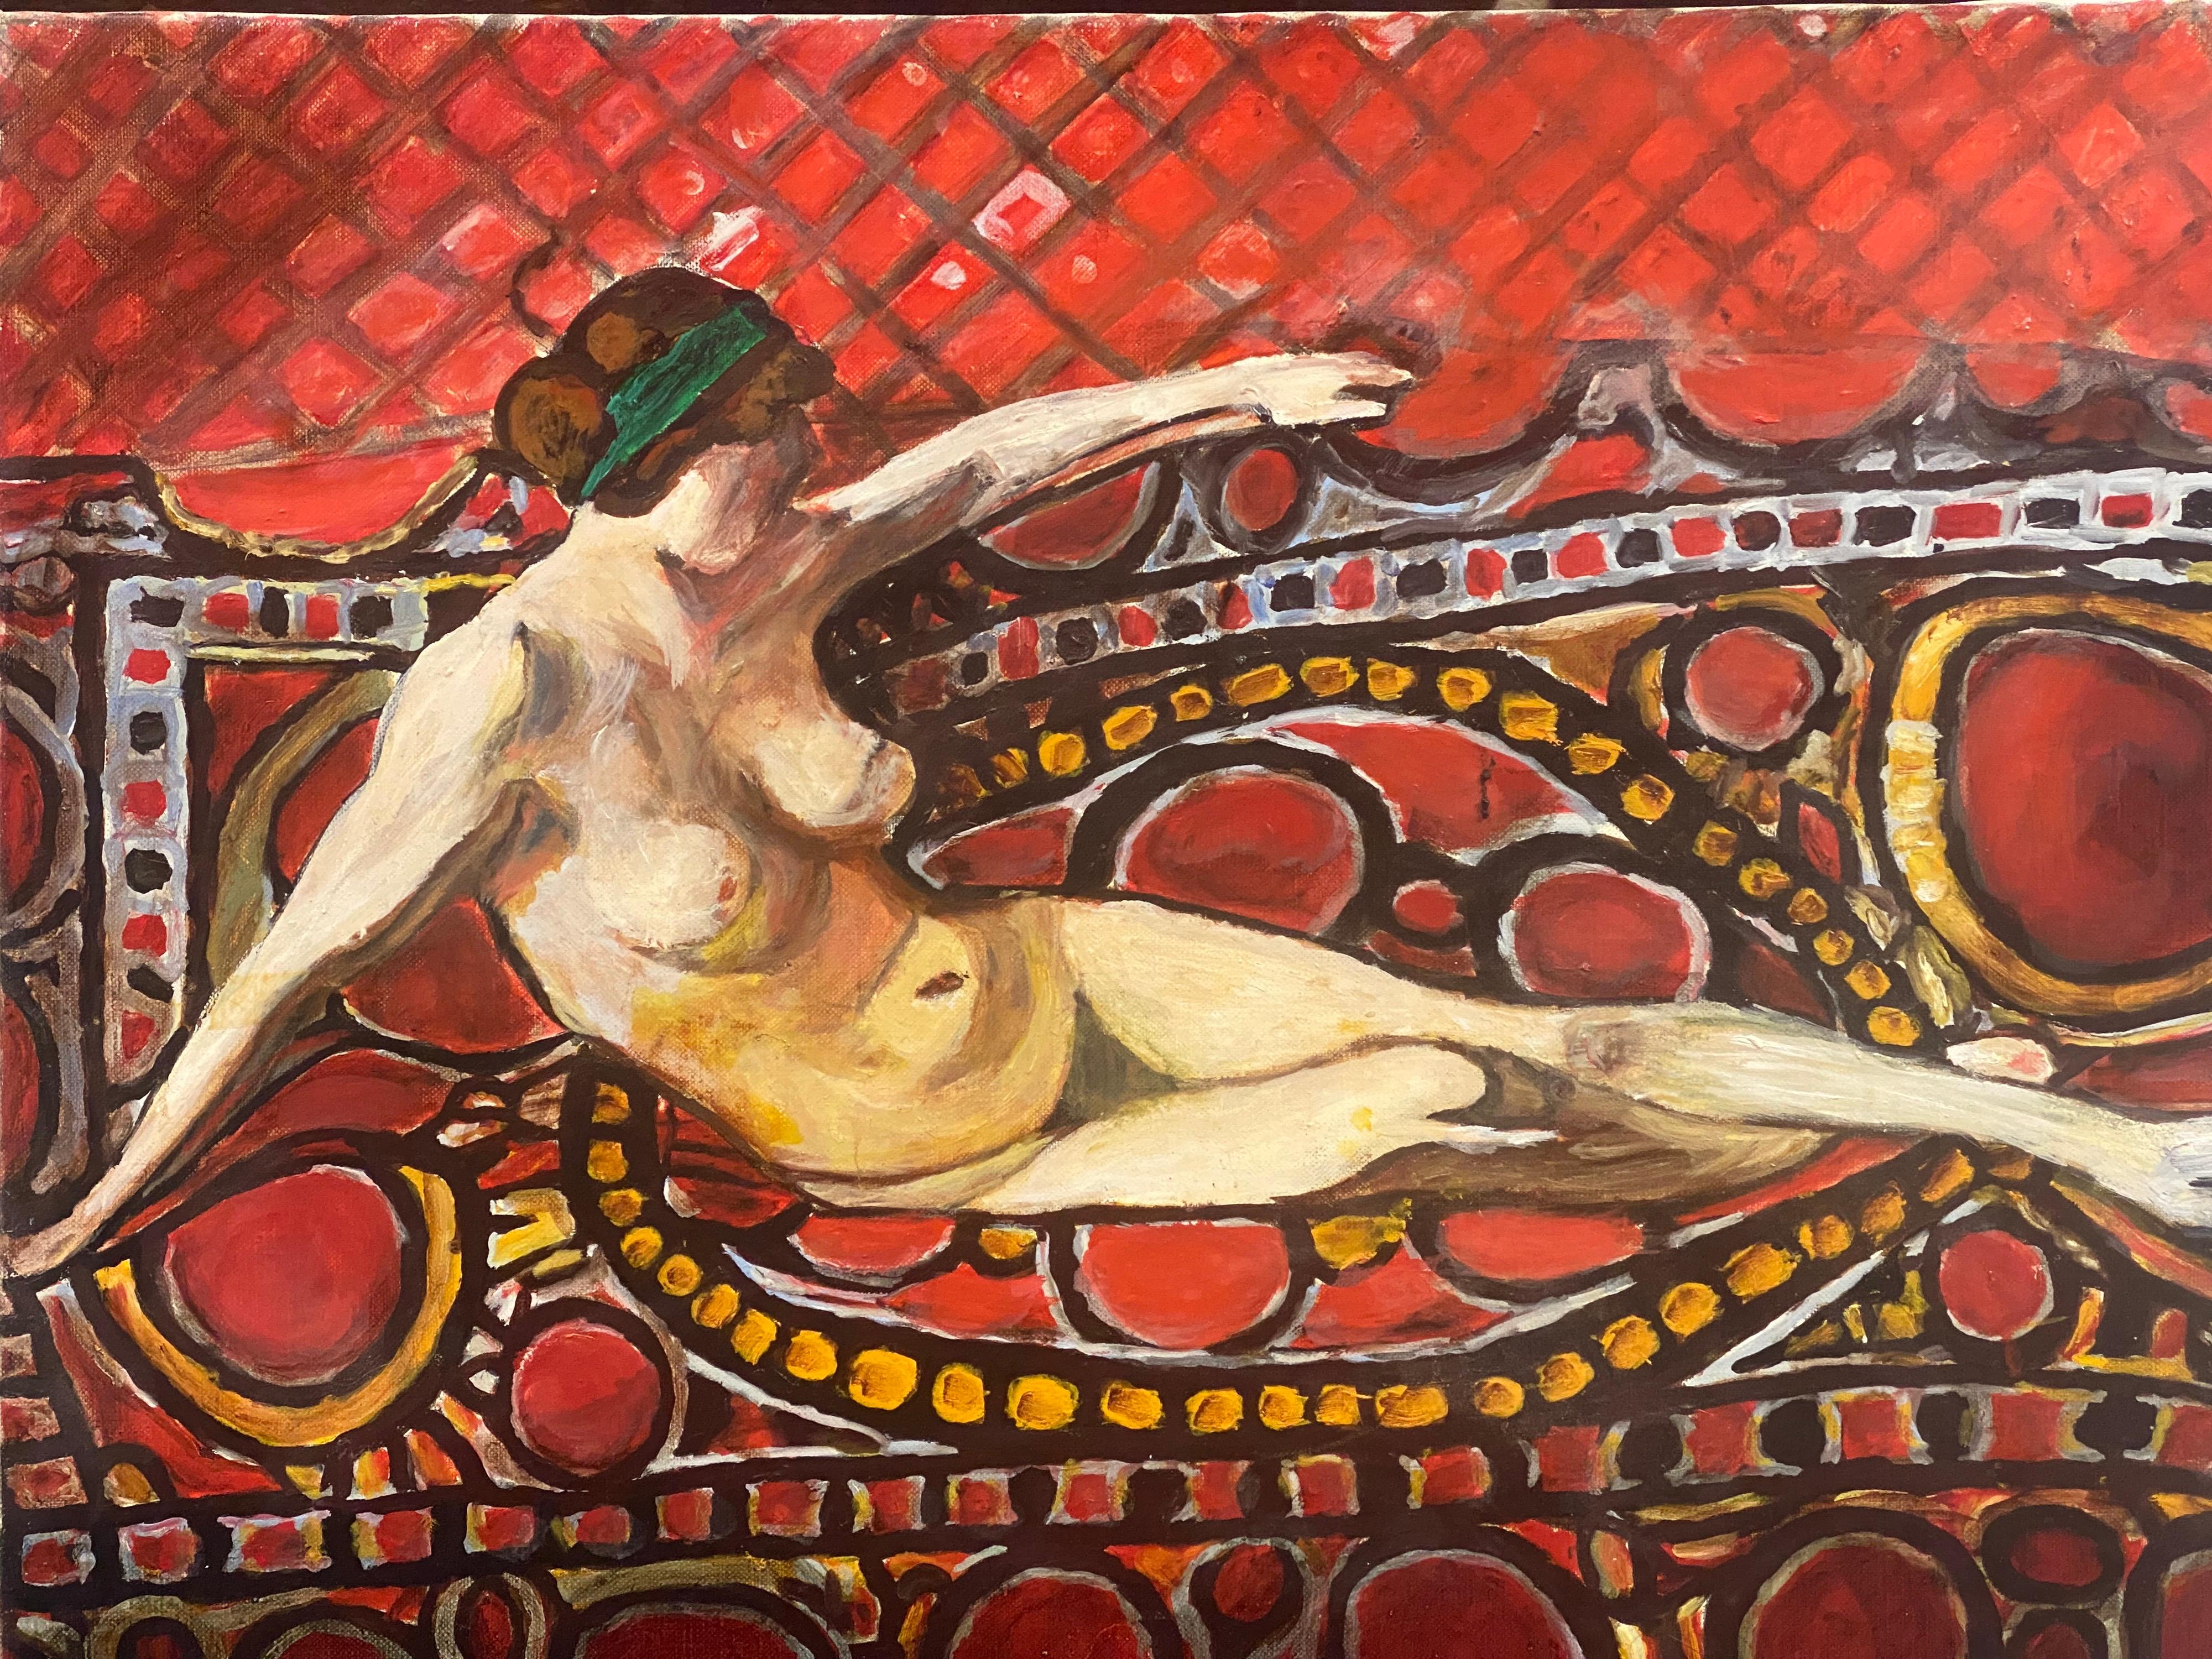 Large French Colorist Modernist Oil Reclining Nude on Red Sofa. 1970's Oil - Painting by Unknown